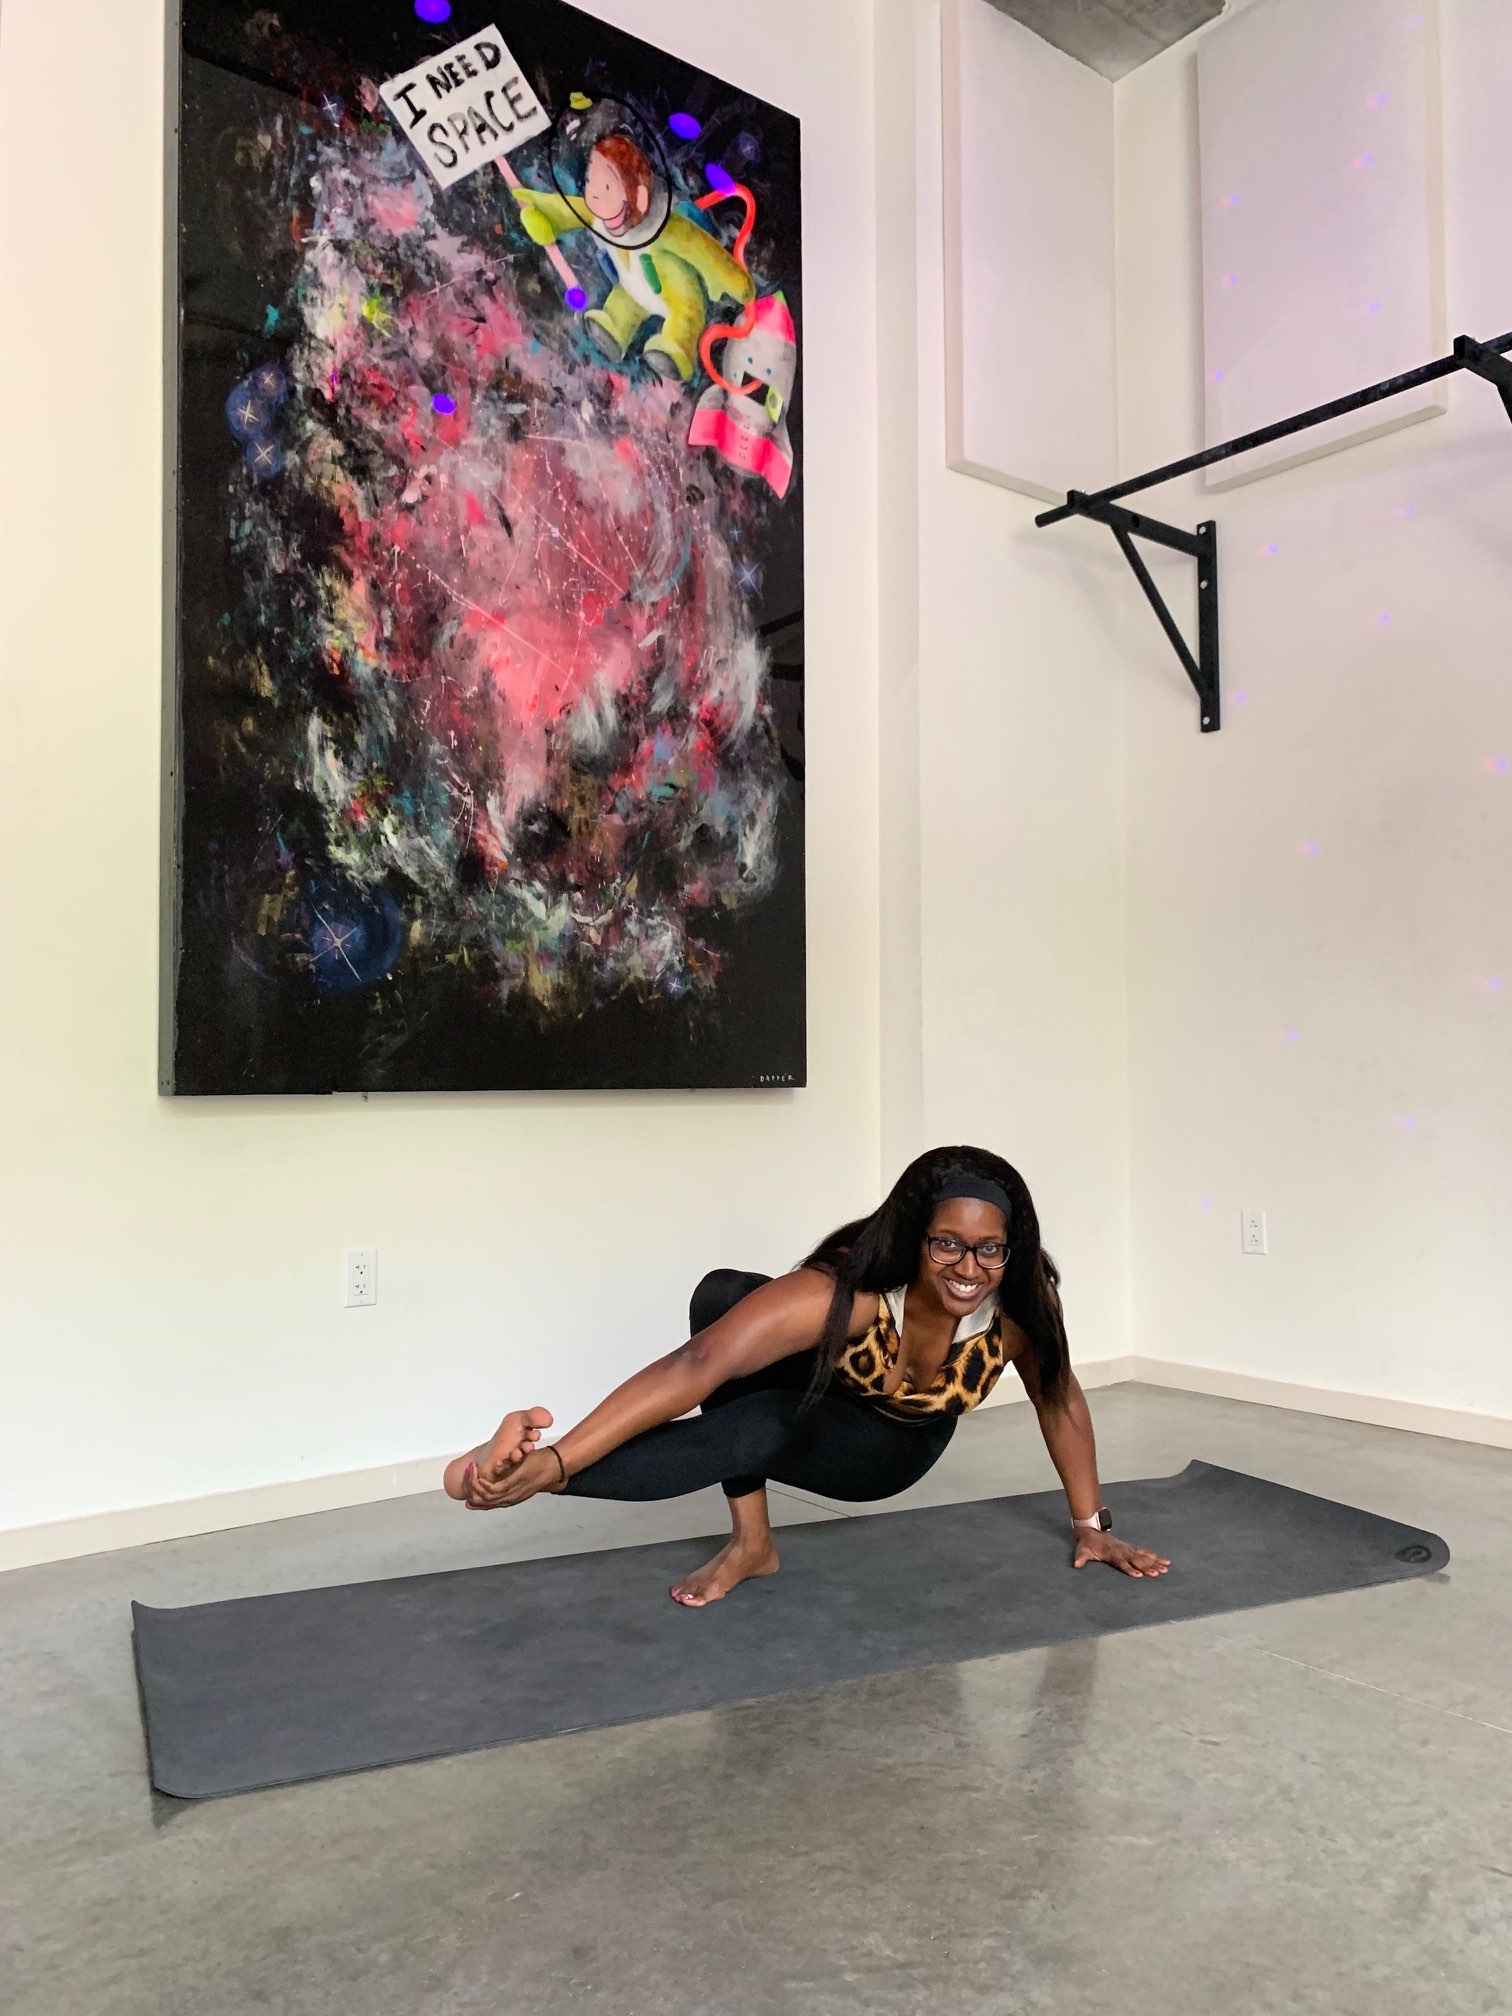 An image of lifestyle blogger Ariel on her yoga mat.